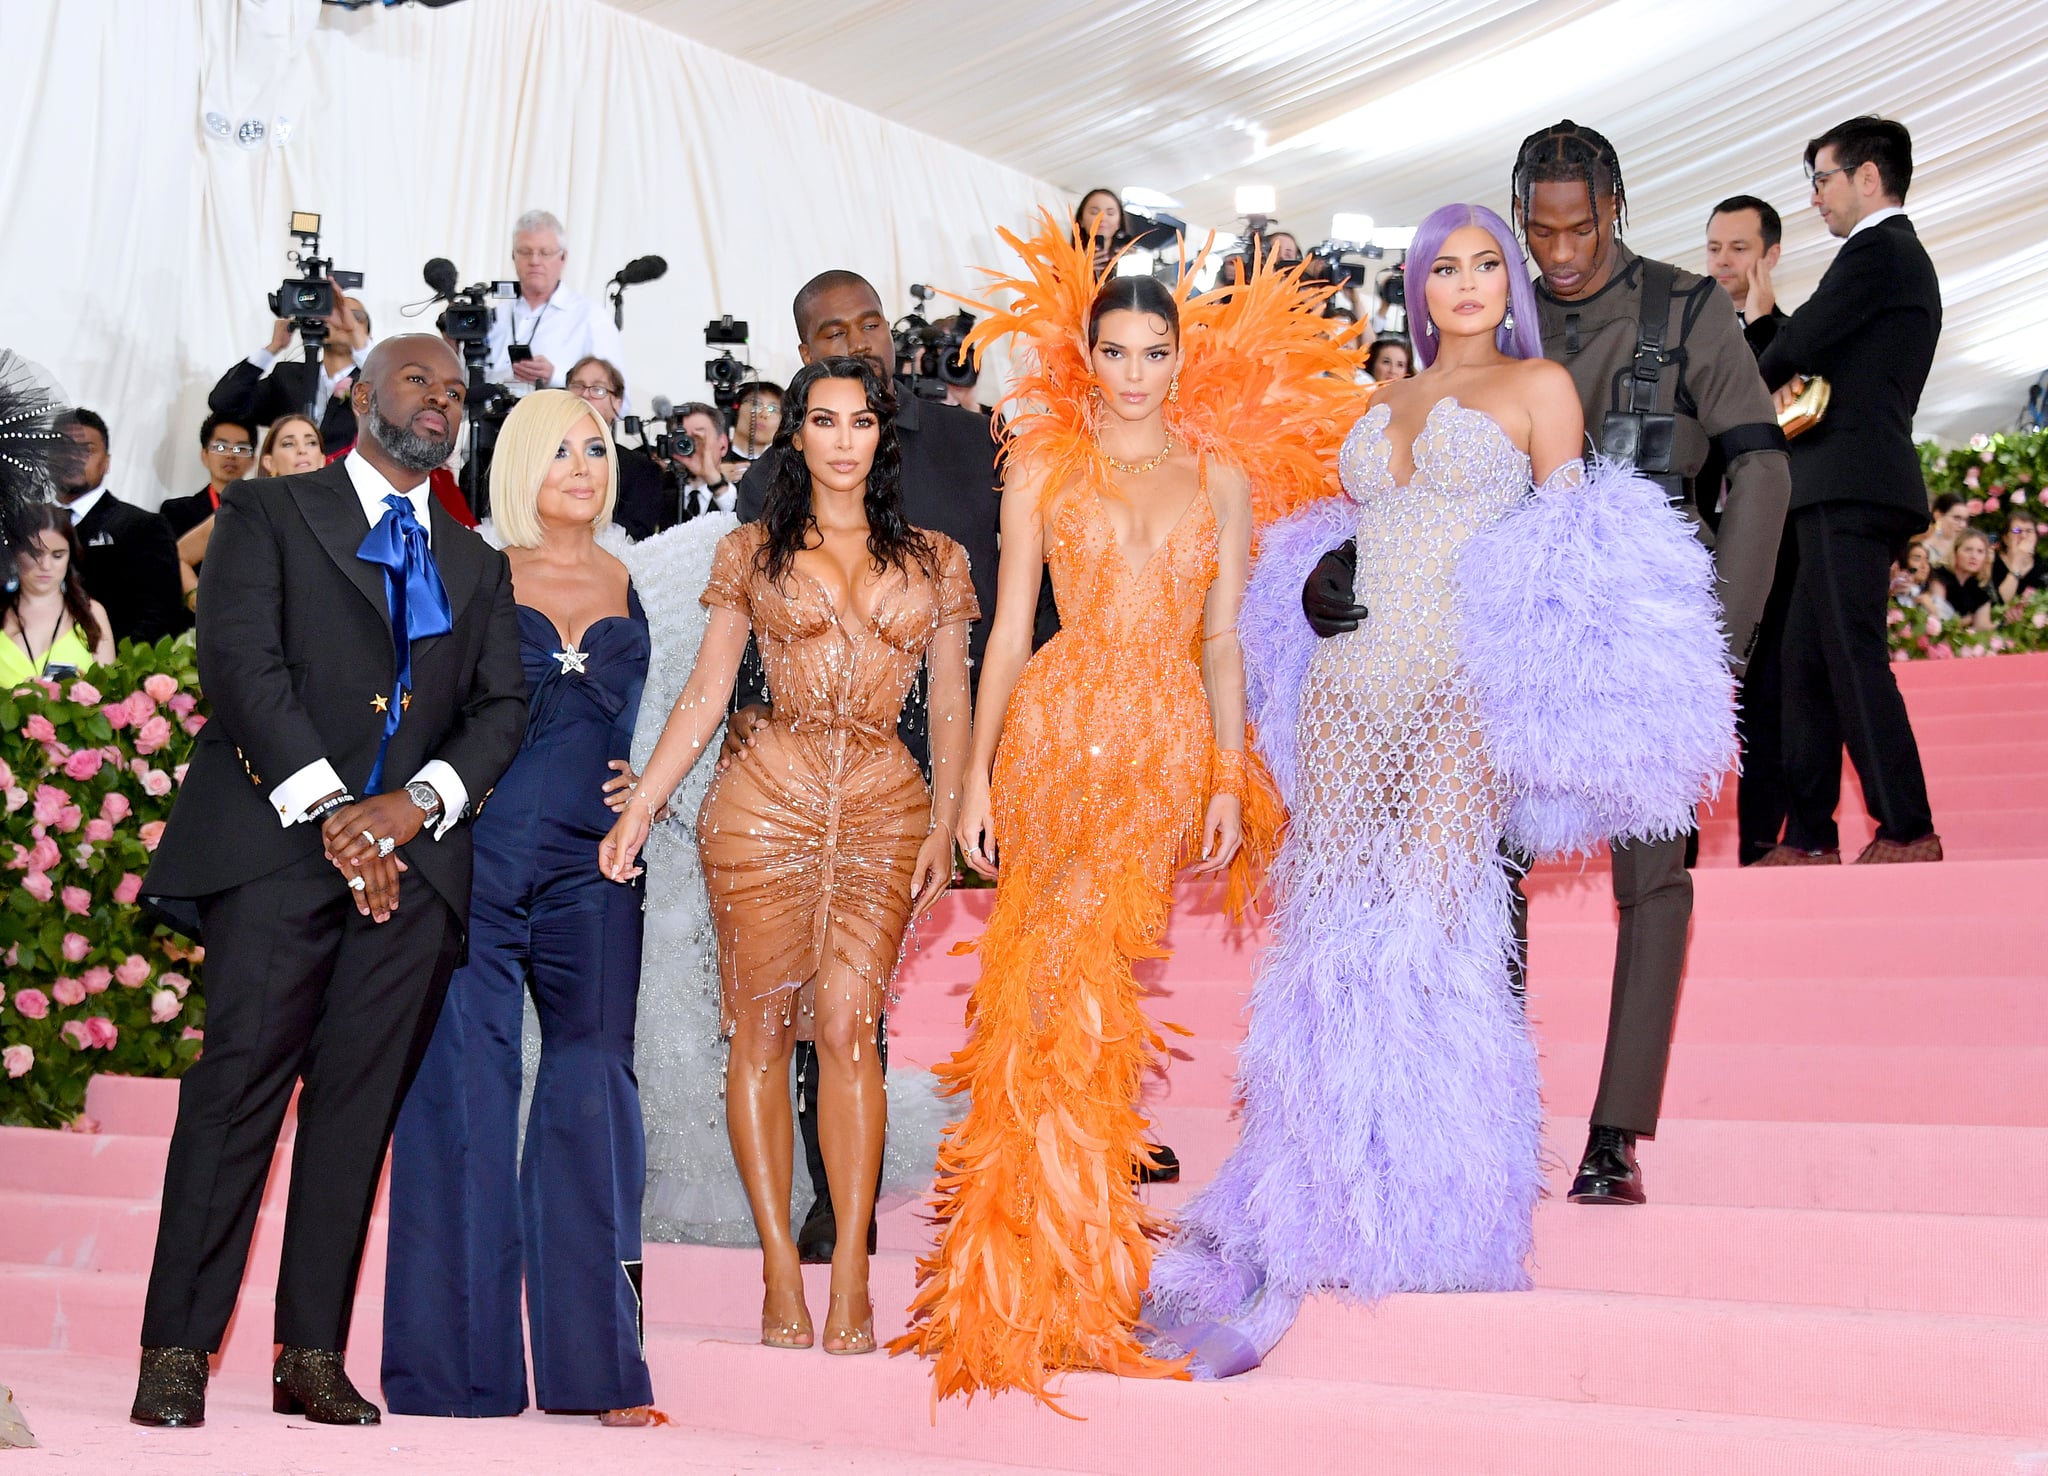 NEW YORK, NEW YORK - MAY 06: Corey Gamble, Kris Jenner, Kanye West, Kim Kardashian West, Kendall Jenner, Kylie Jenner and Travis Scott attend The 2019 Met Gala Celebrating Camp: Notes on Fashion at Metropolitan Museum of Art on May 06, 2019 in New York City. (Photo by Dia Dipasupil/FilmMagic)